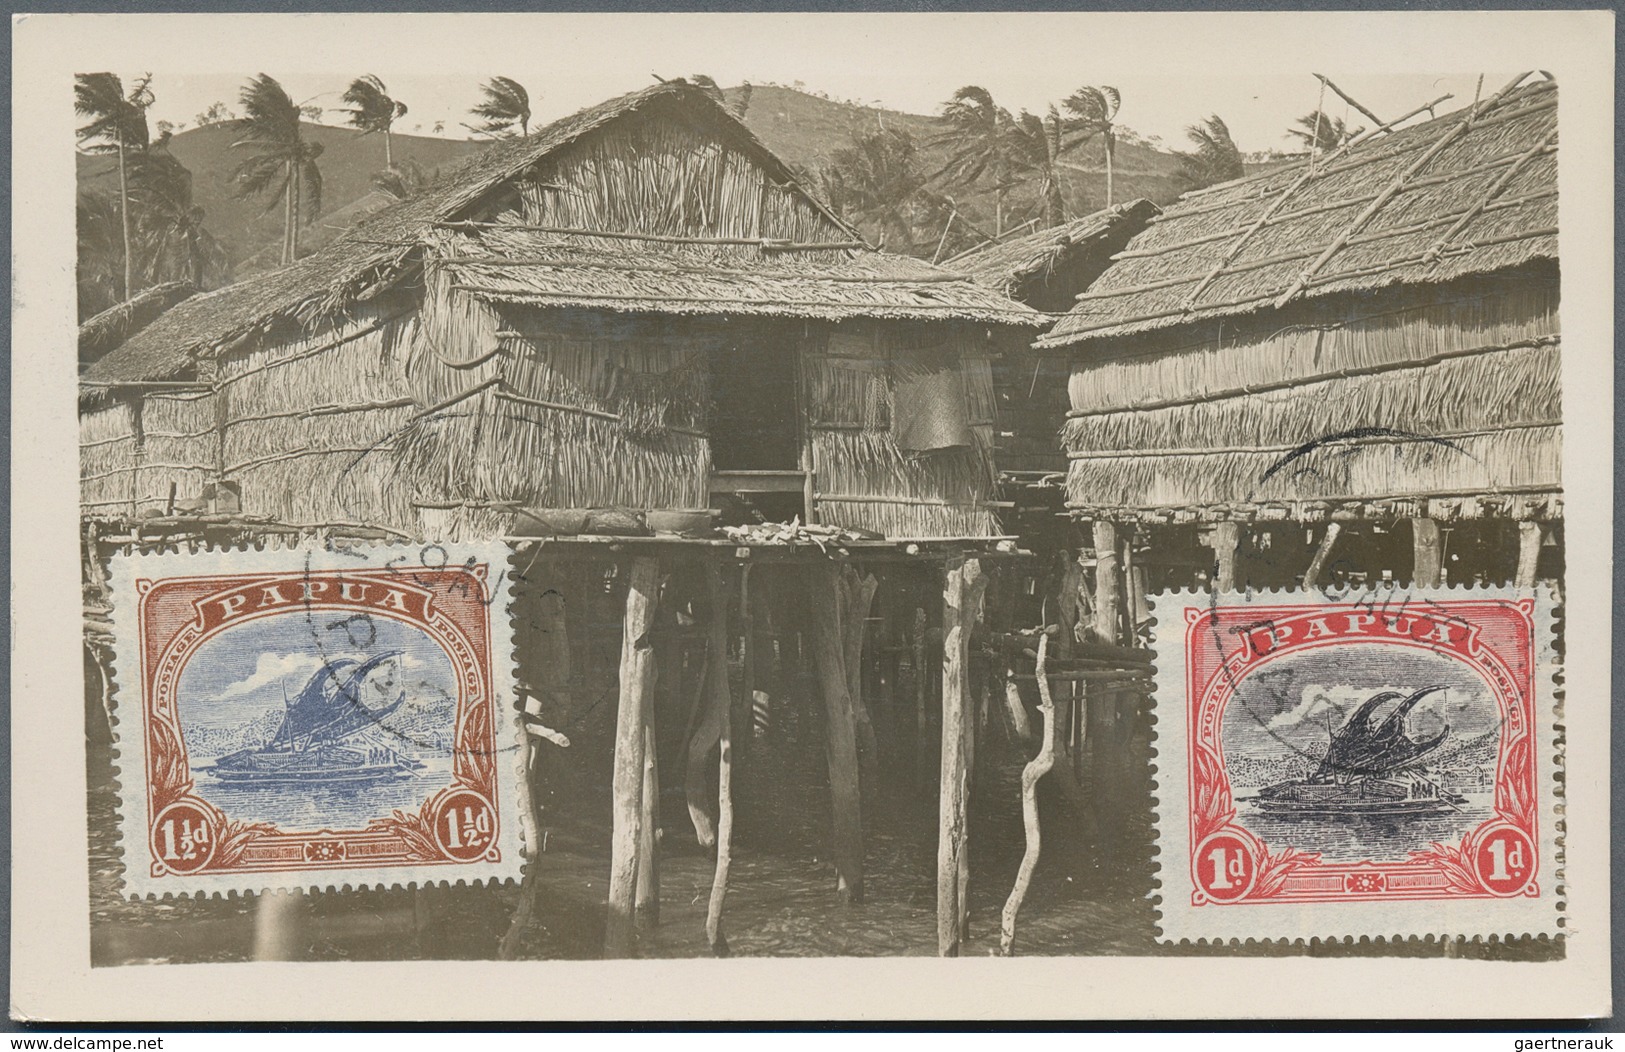 Papua Neuguinea: 1931/64, covers of PNG (14, some w. slight faults) or Australia used in PNG (18, ca